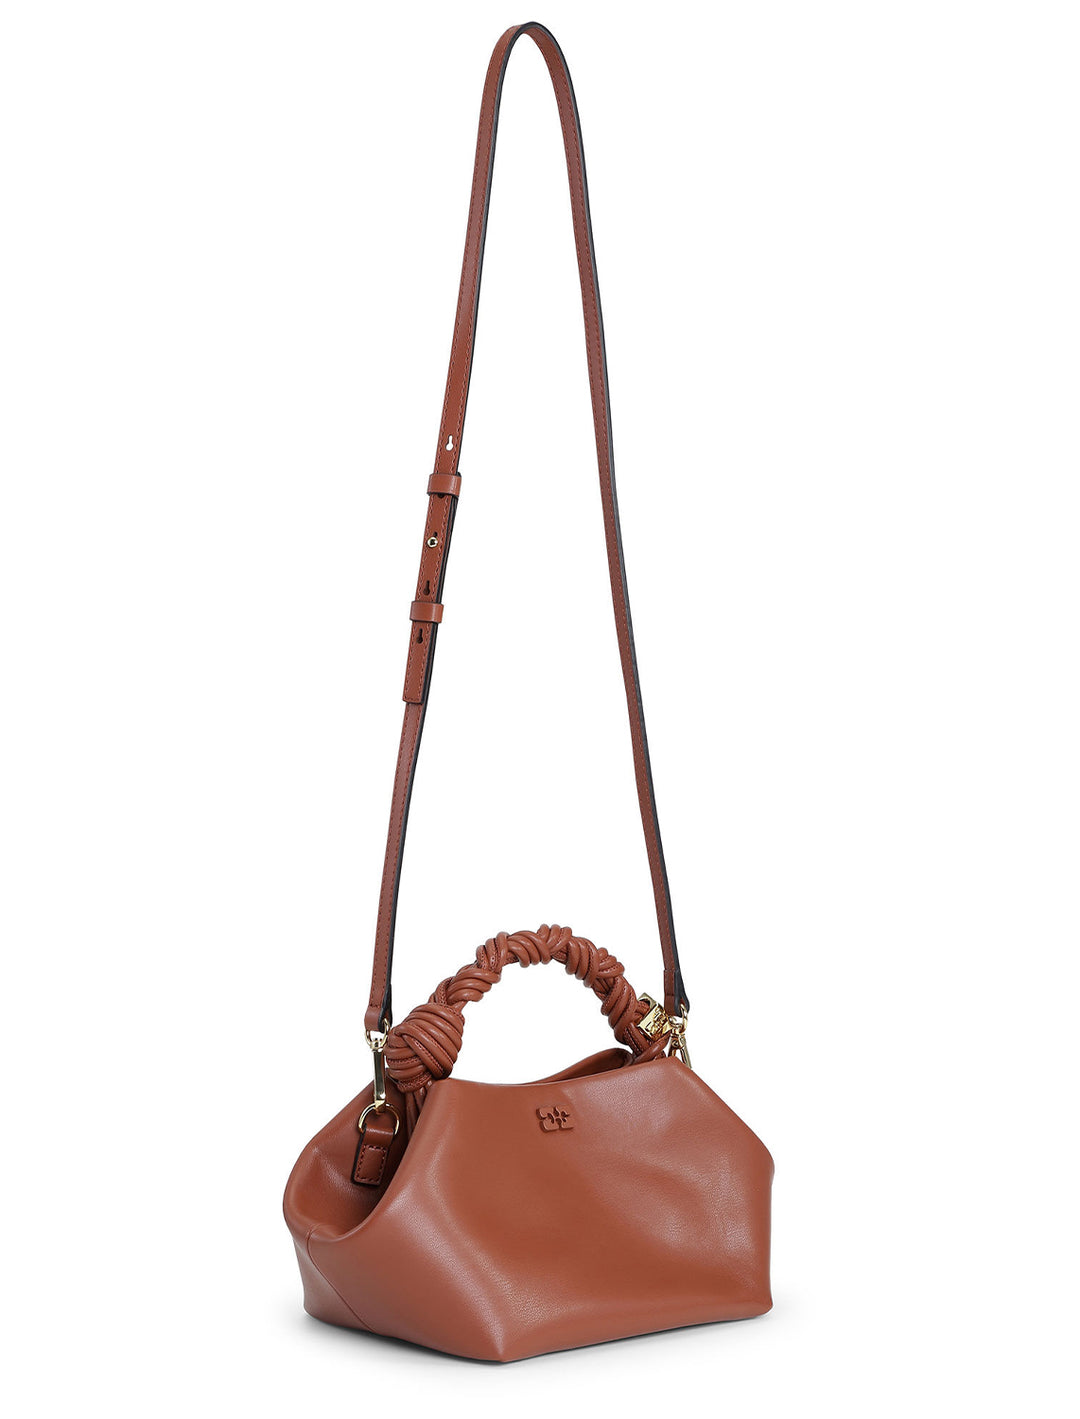 View of GANNI's small bou bag in terracotta with shoulder strap.